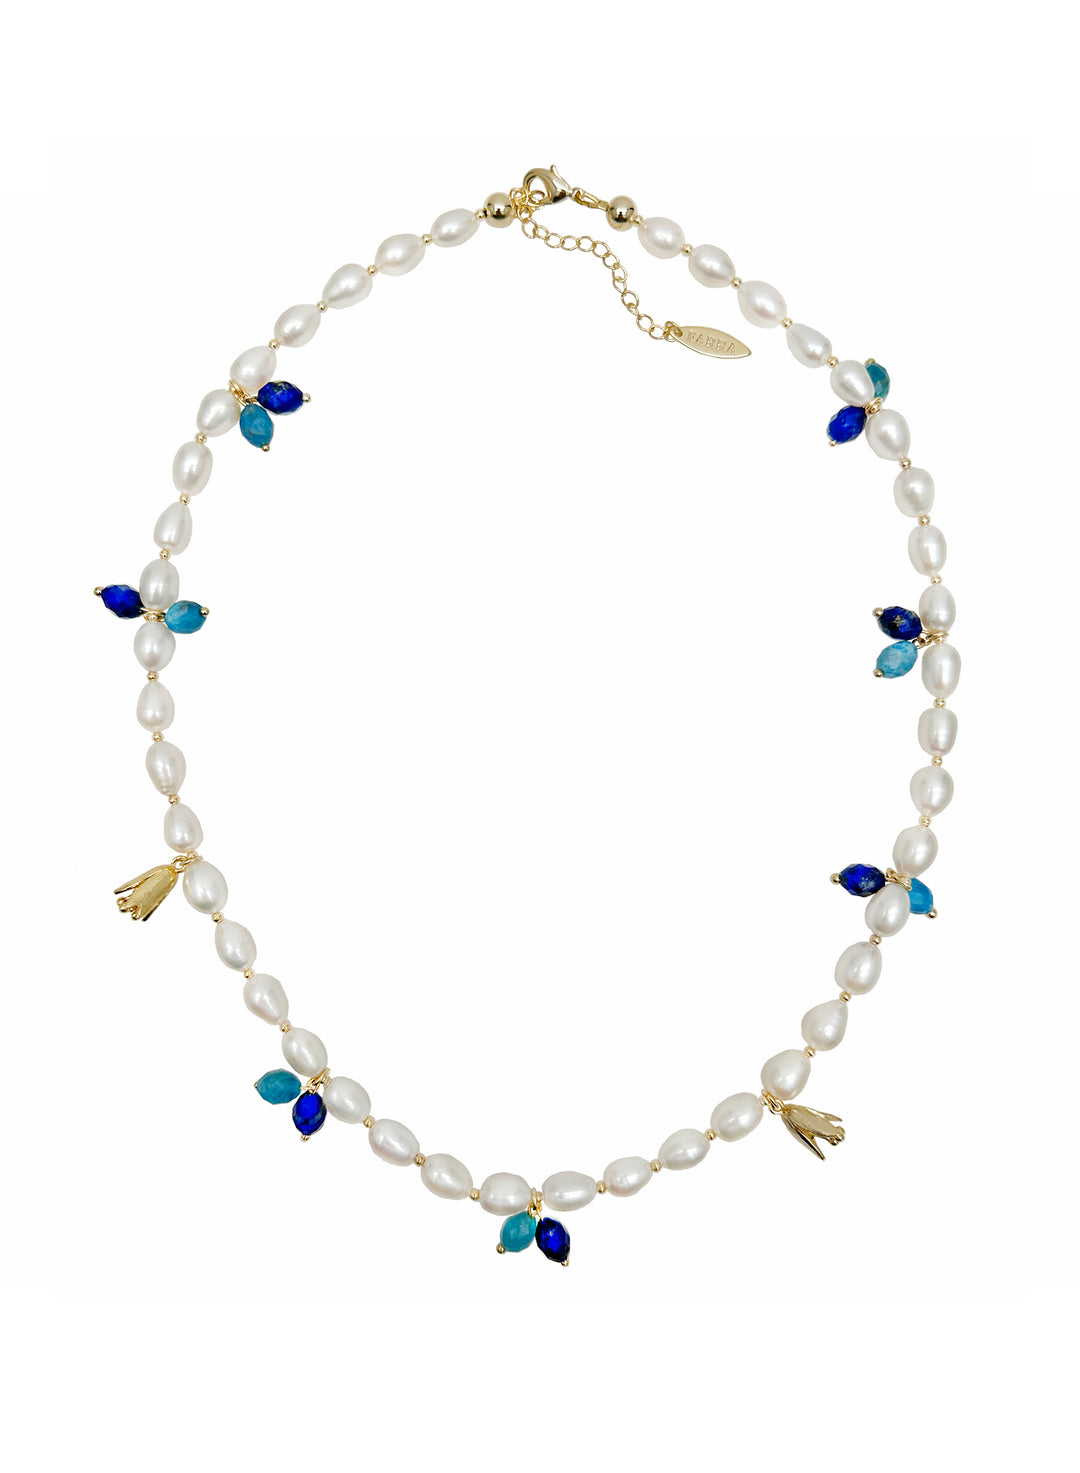 Freshwater Pearls with Blue Gemstone and Flower Charms Necklace LN029 - FARRA